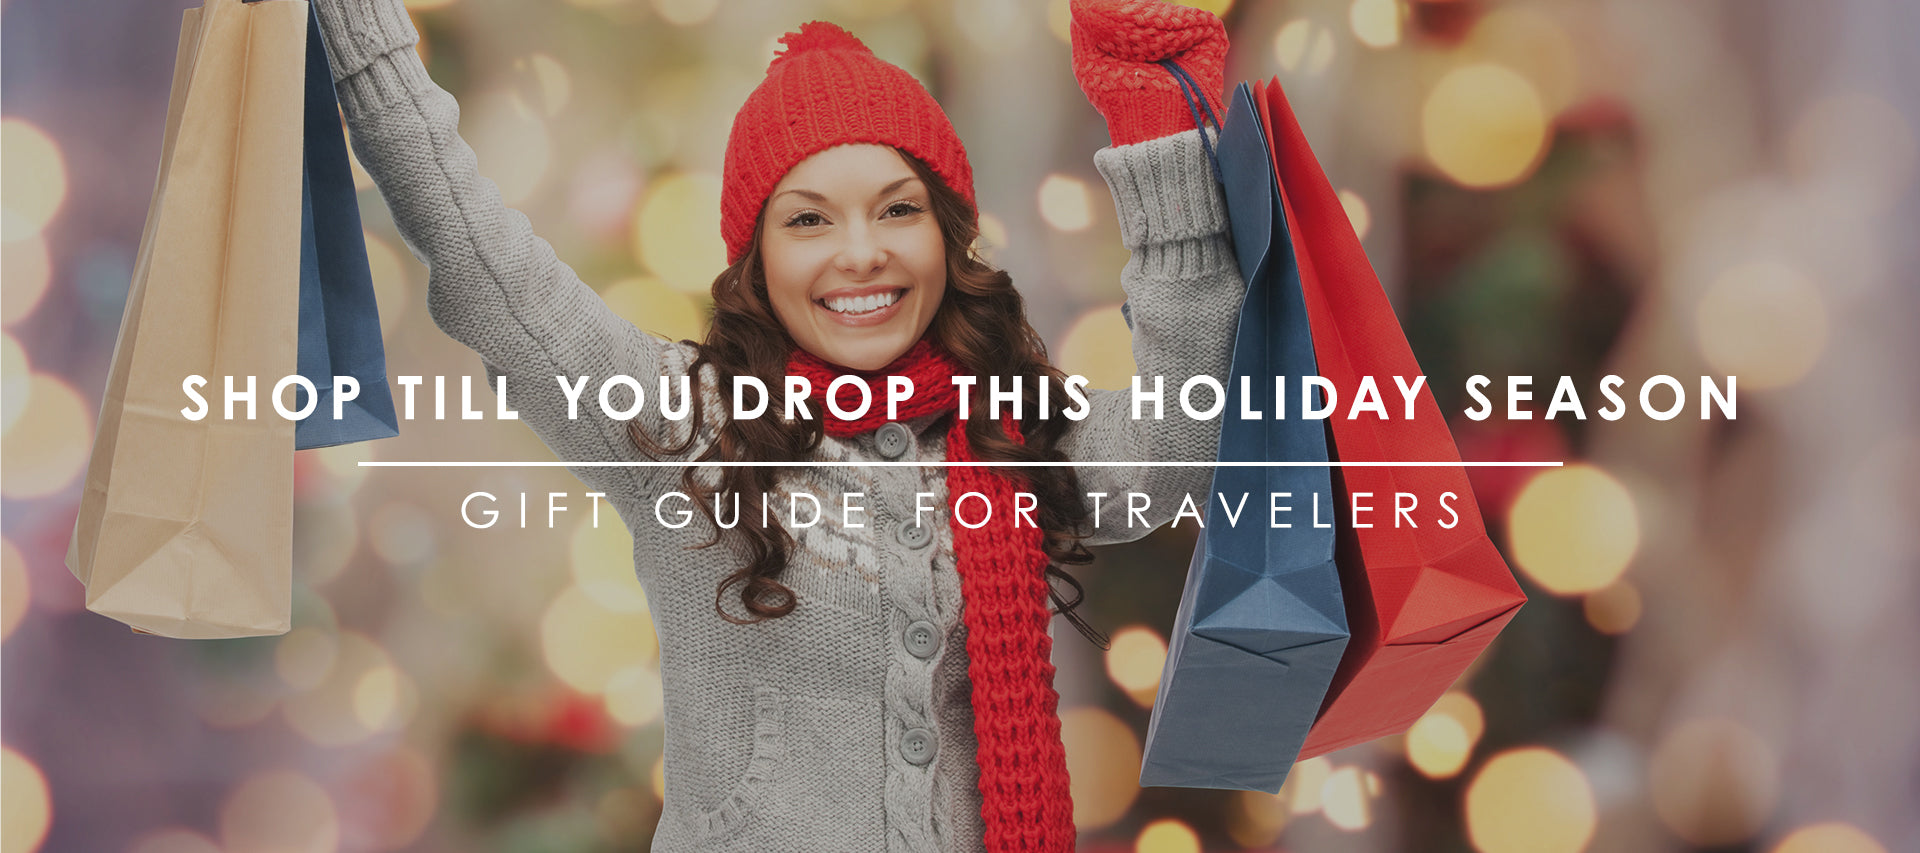 2021 Holiday Gift Guide for Travelers